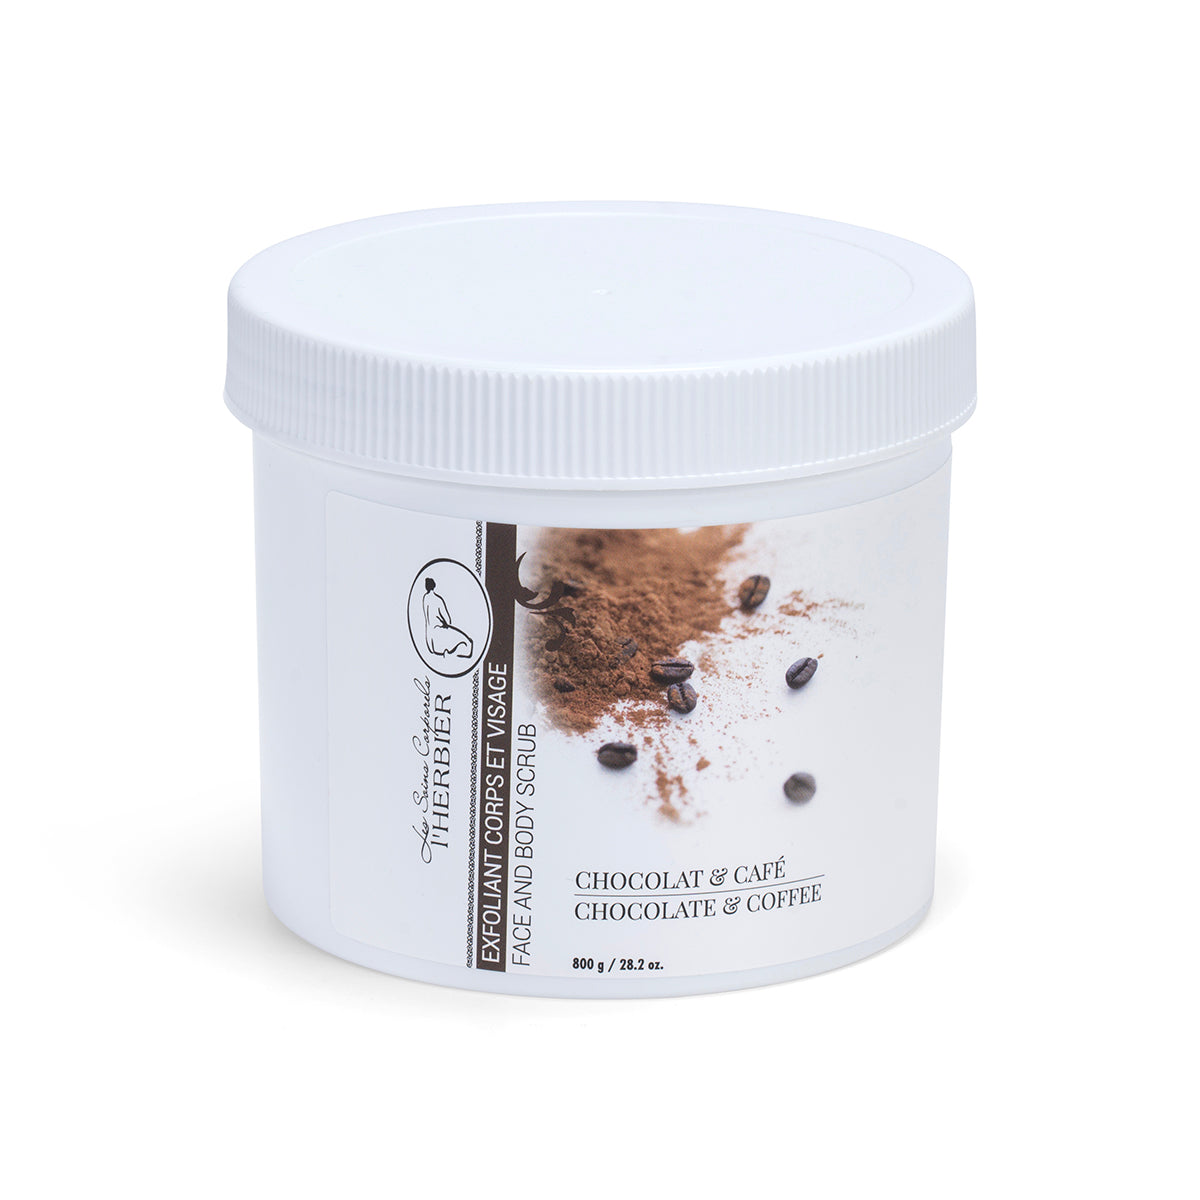 Chocolate and Coffee Body and Face Exfoliant 800g